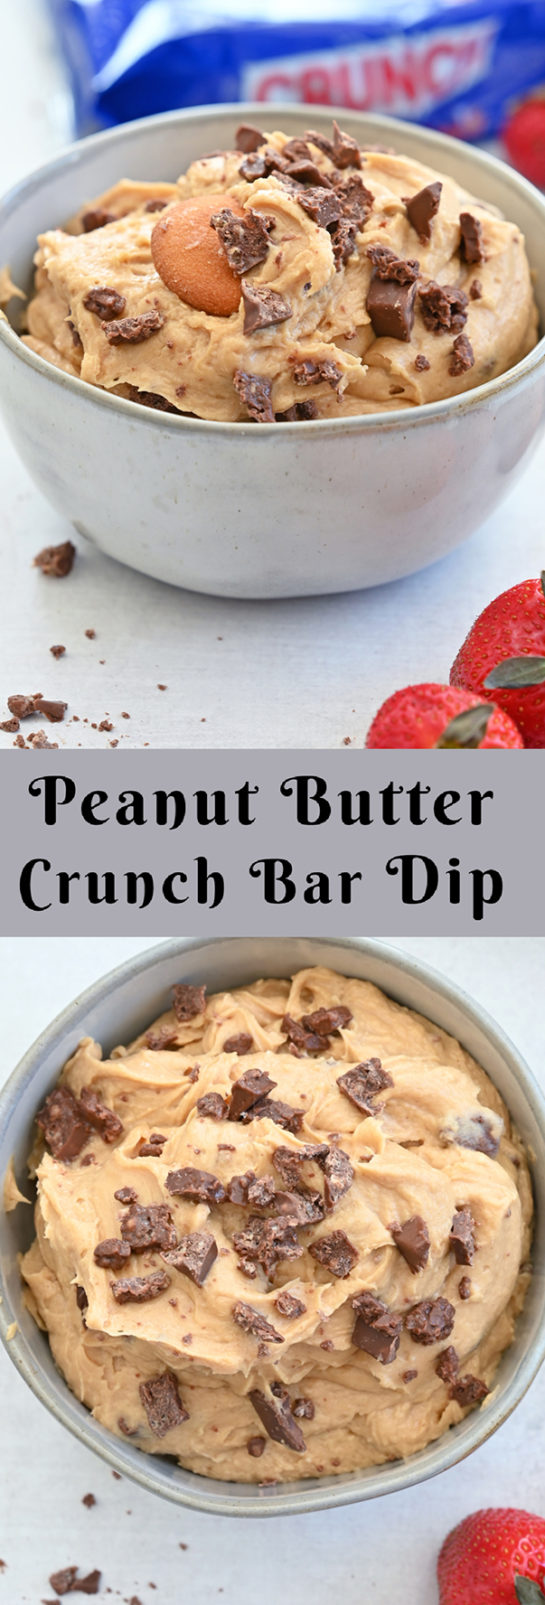 Indulgent, Easy Peanut Butter Crunch Bar Dip is a sweet dunkable dessert dip recipe that's perfect for parties and made in less than 10 minutes. Slice up an apple & dig in!